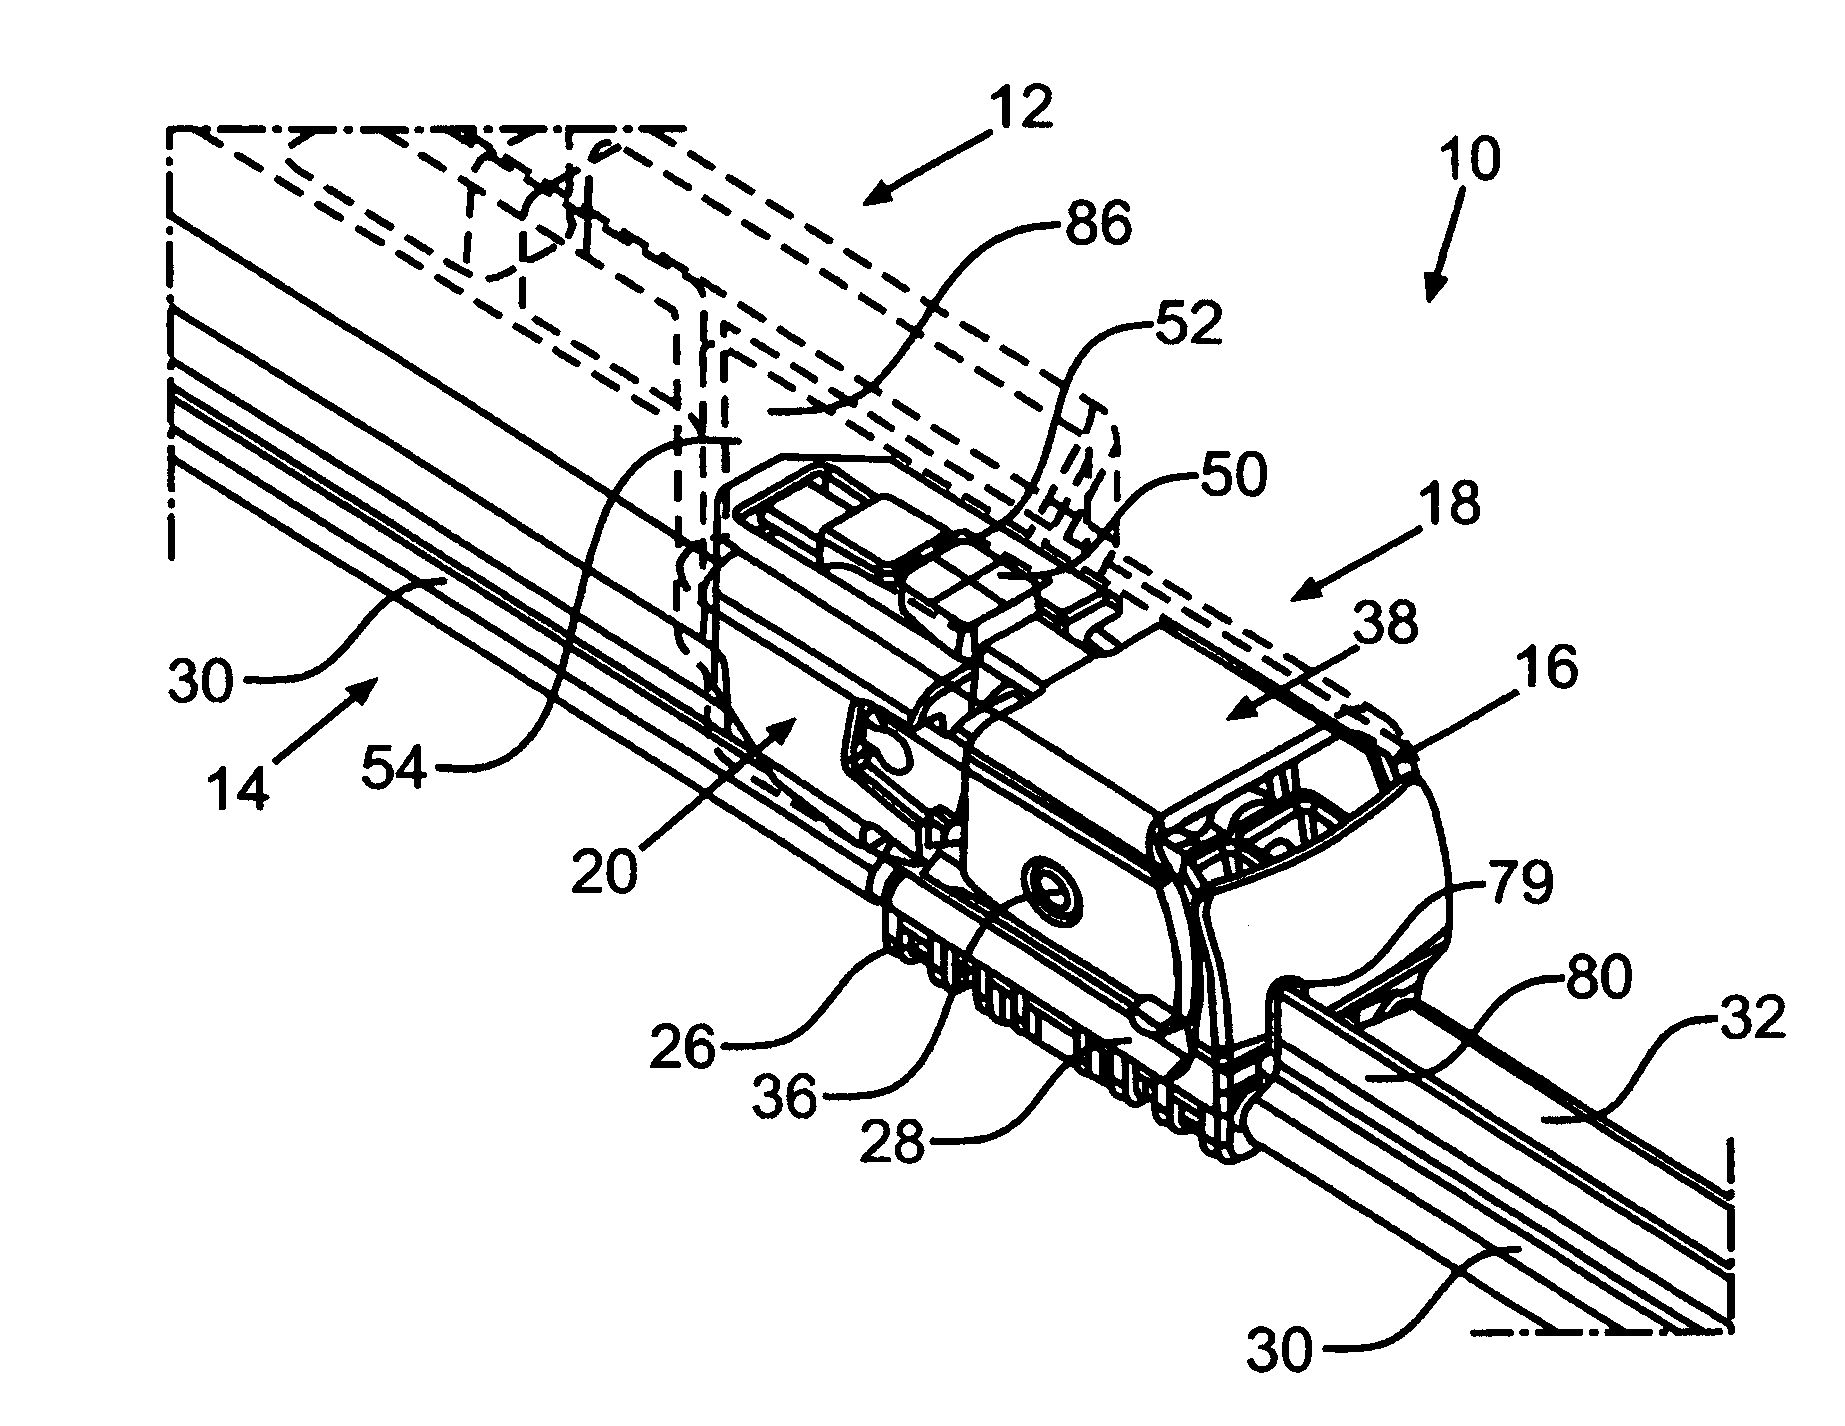 Wiper Arm Arrangement and Method for Connecting a Wiper Blade to a Wiper Arm